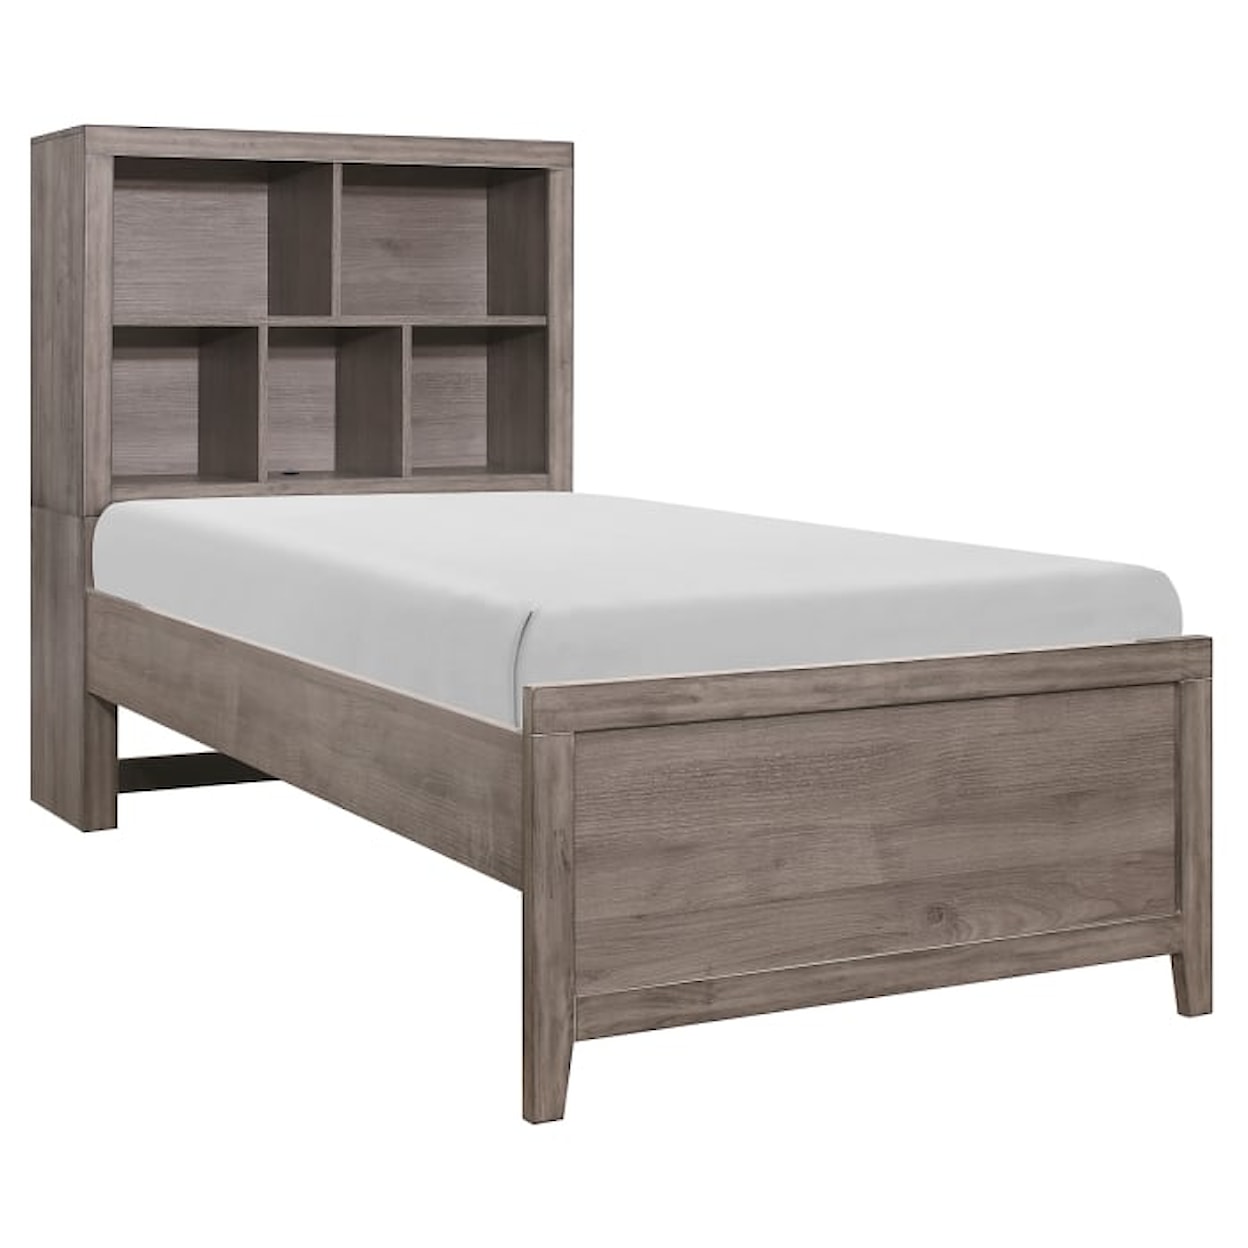 Homelegance Furniture Woodrow 4-Piece Twin Wall Bed